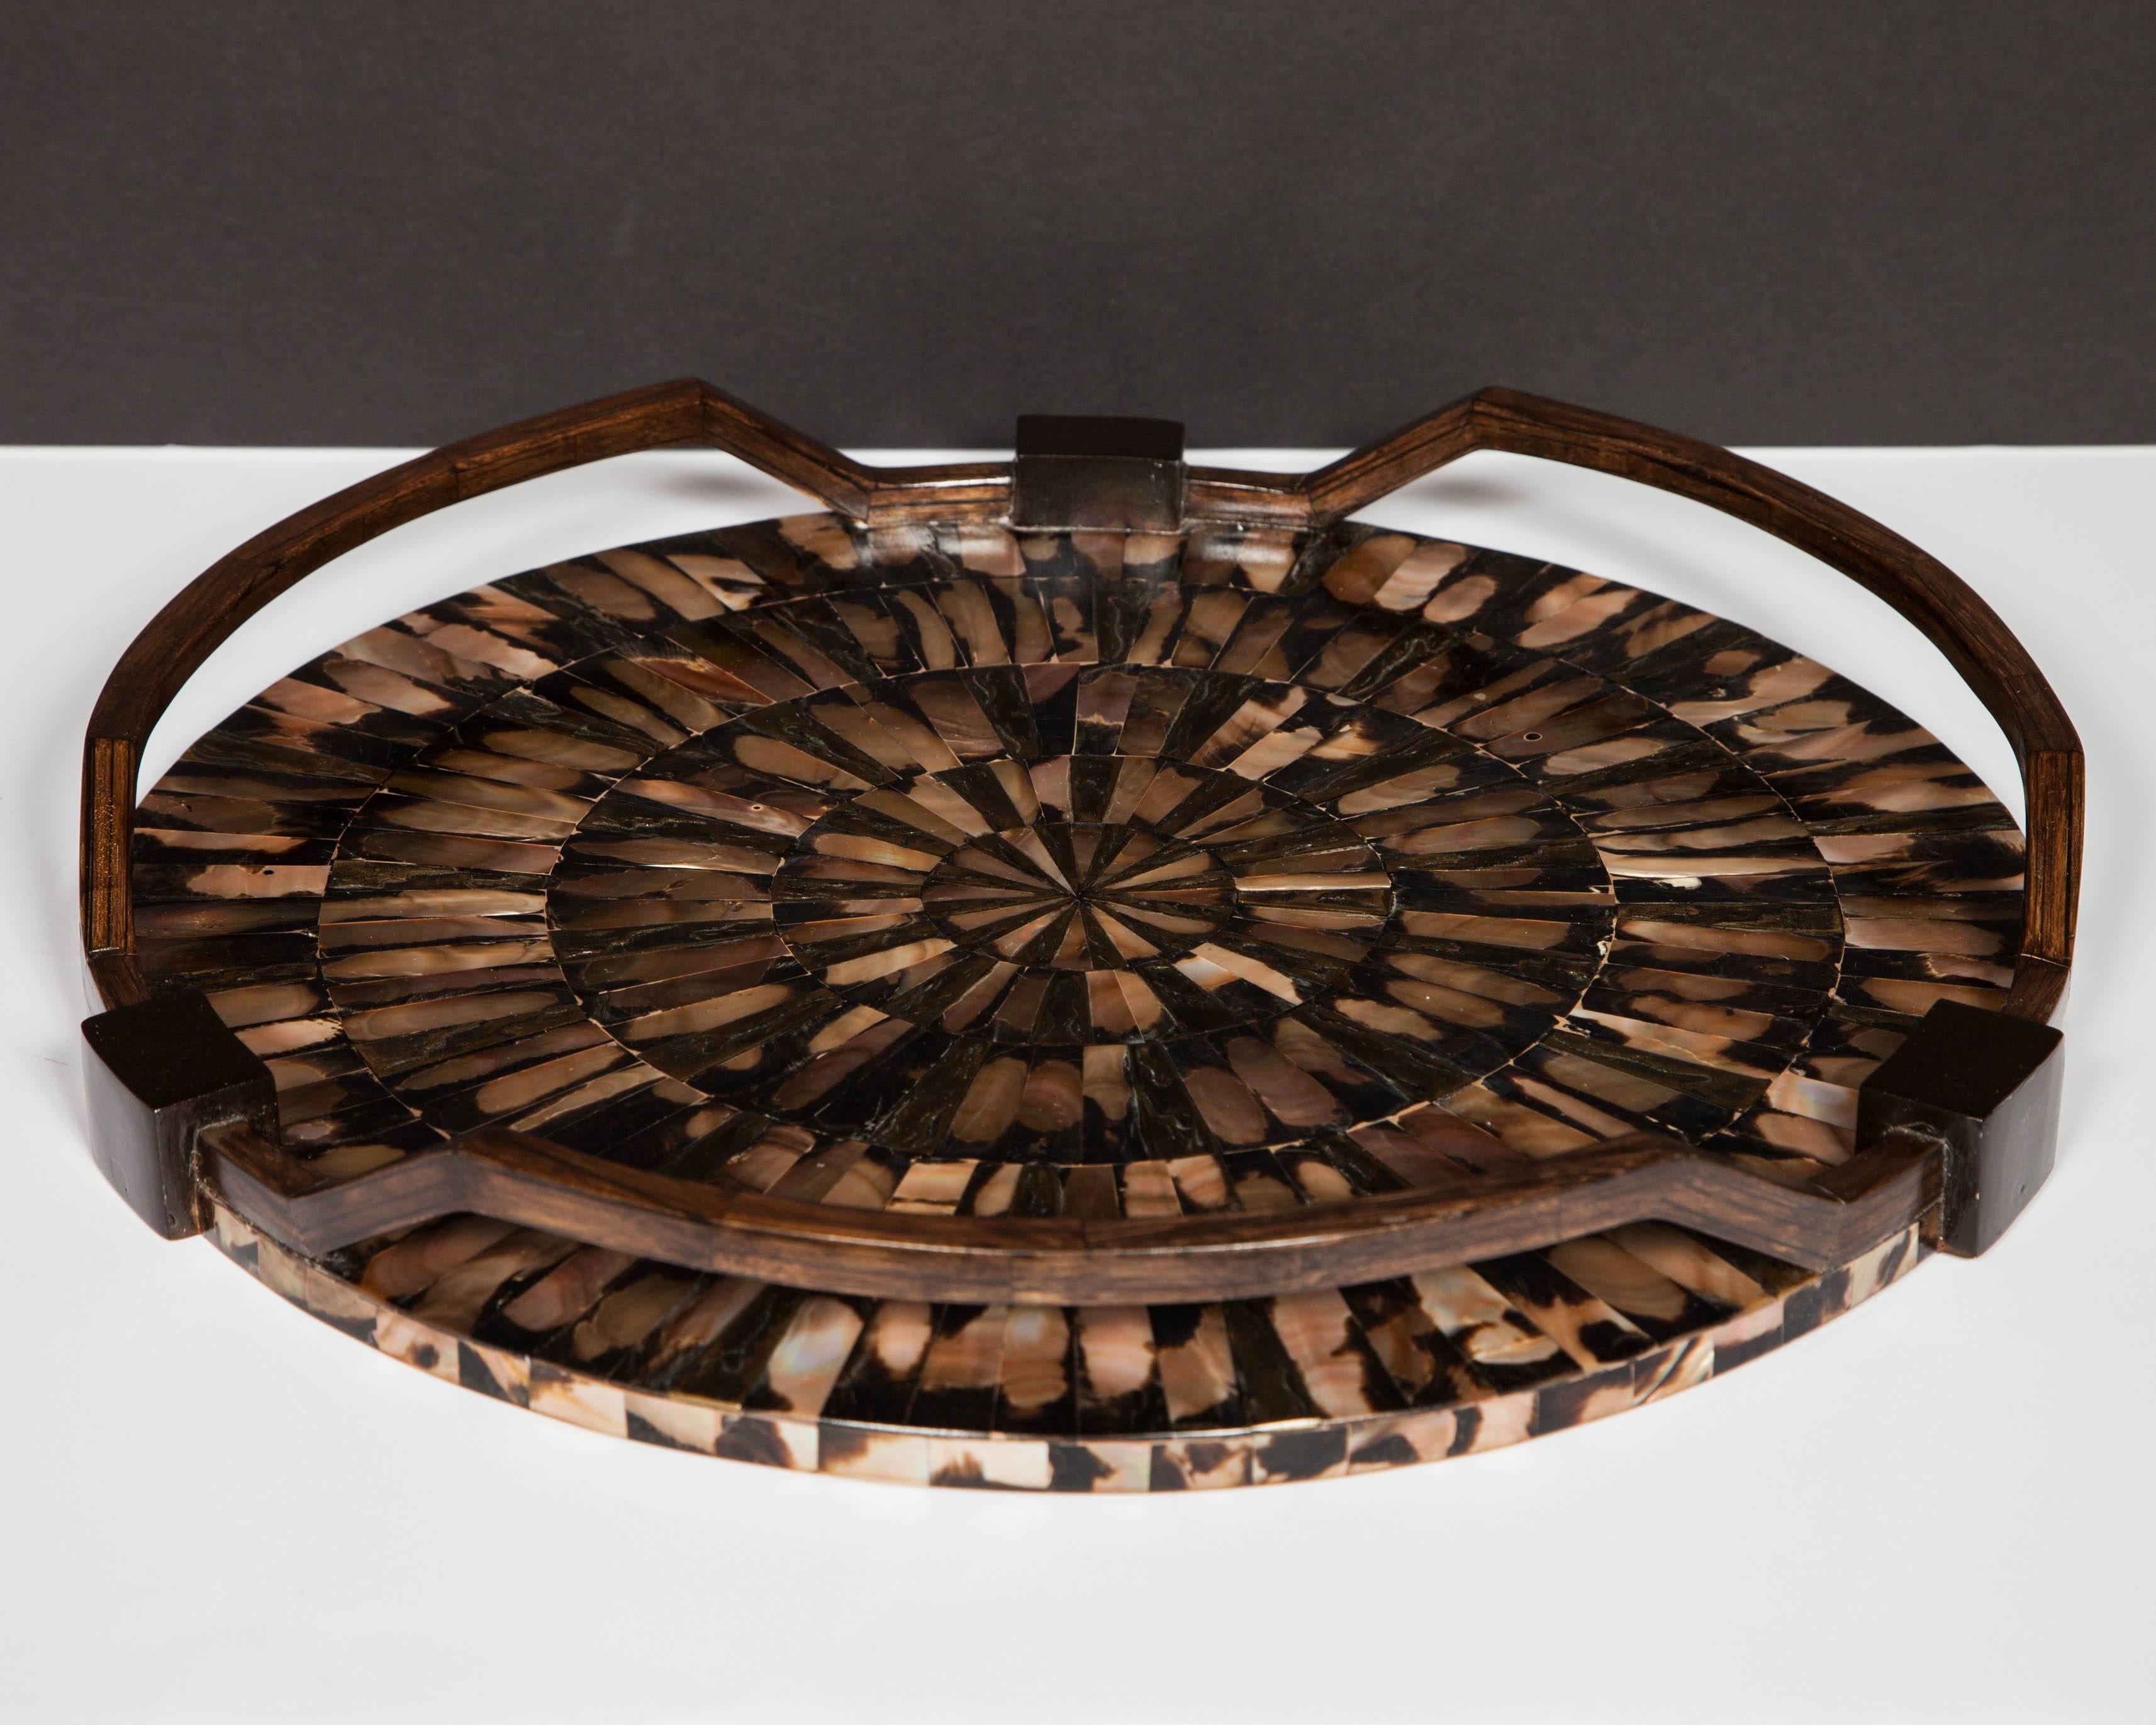 Round serving tray featuring exotic inlays of mother of pearl in varying iridescent hues. The tessellated inlays create a spectacular starburst design. All handcrafted, with a series of hand carved handles in palmwood with ebonized wood block